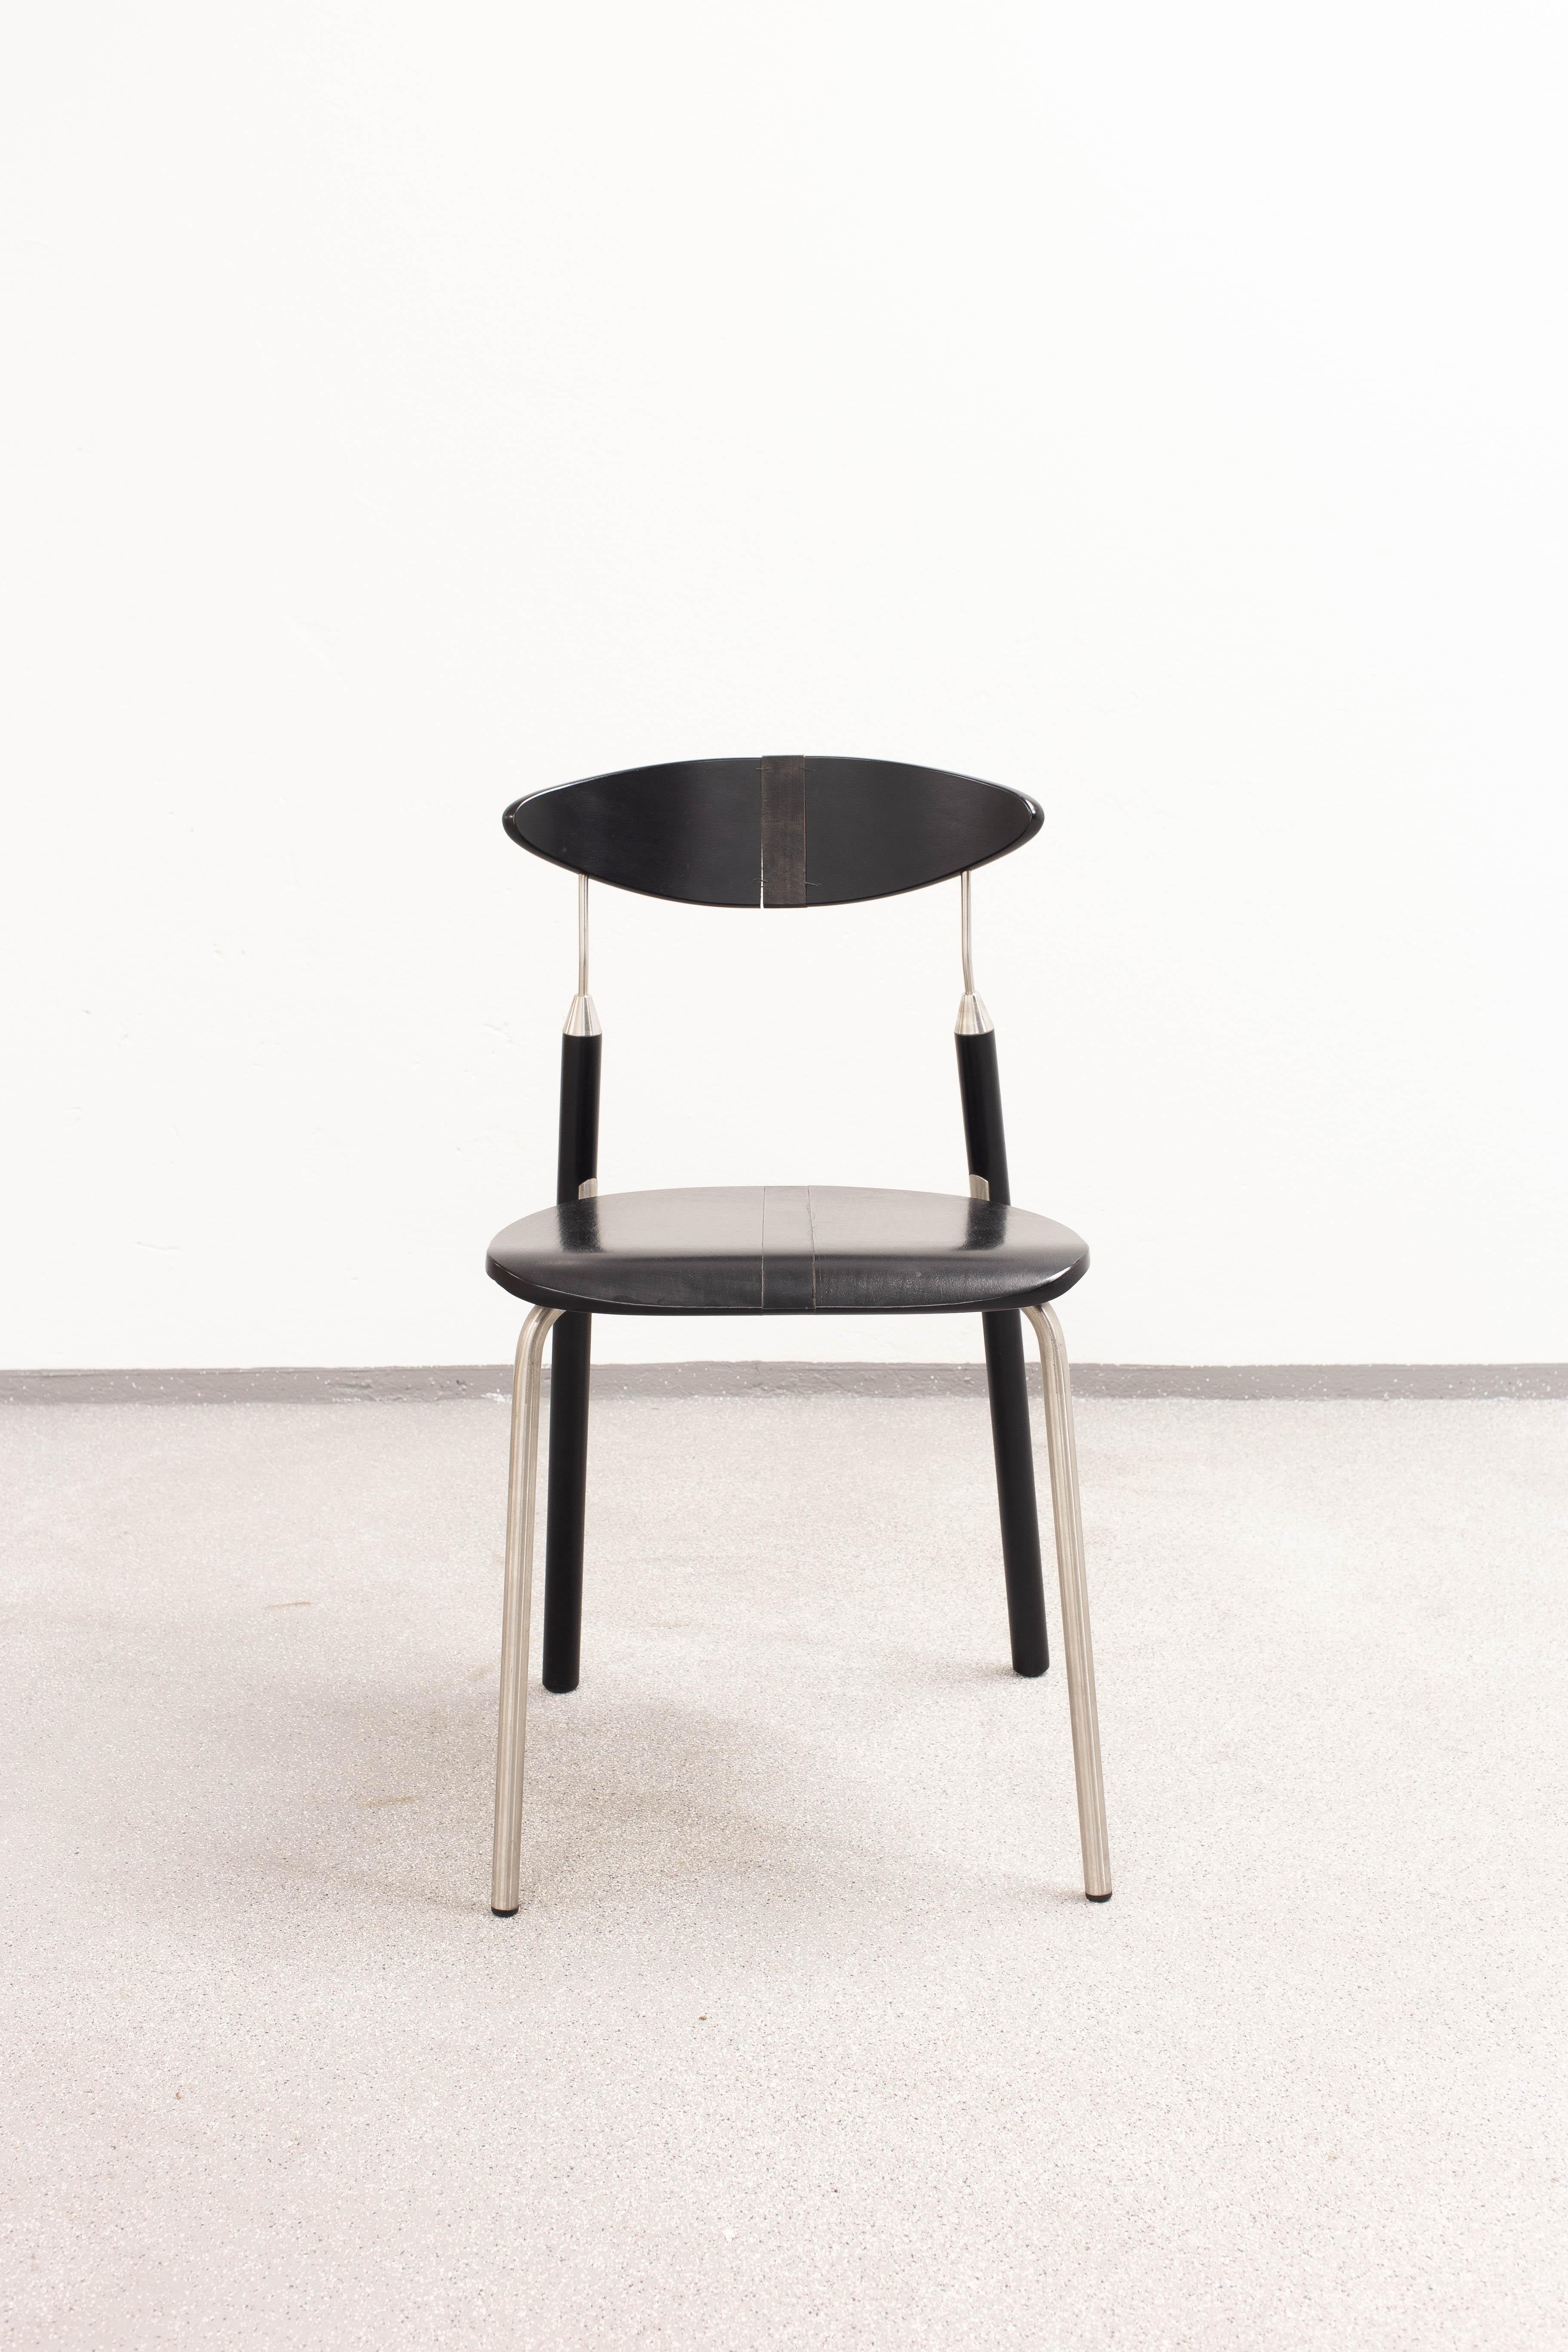 Rare midcentury Scandinavian chair, Probably Sørlie Møbelfabrikk Workshop Prototype
Line detail through the middle of the chair back and seat.

This 1960s chair was purchased directly from the Sørlie Møbelfabrikk Workshop. The designer is unknown